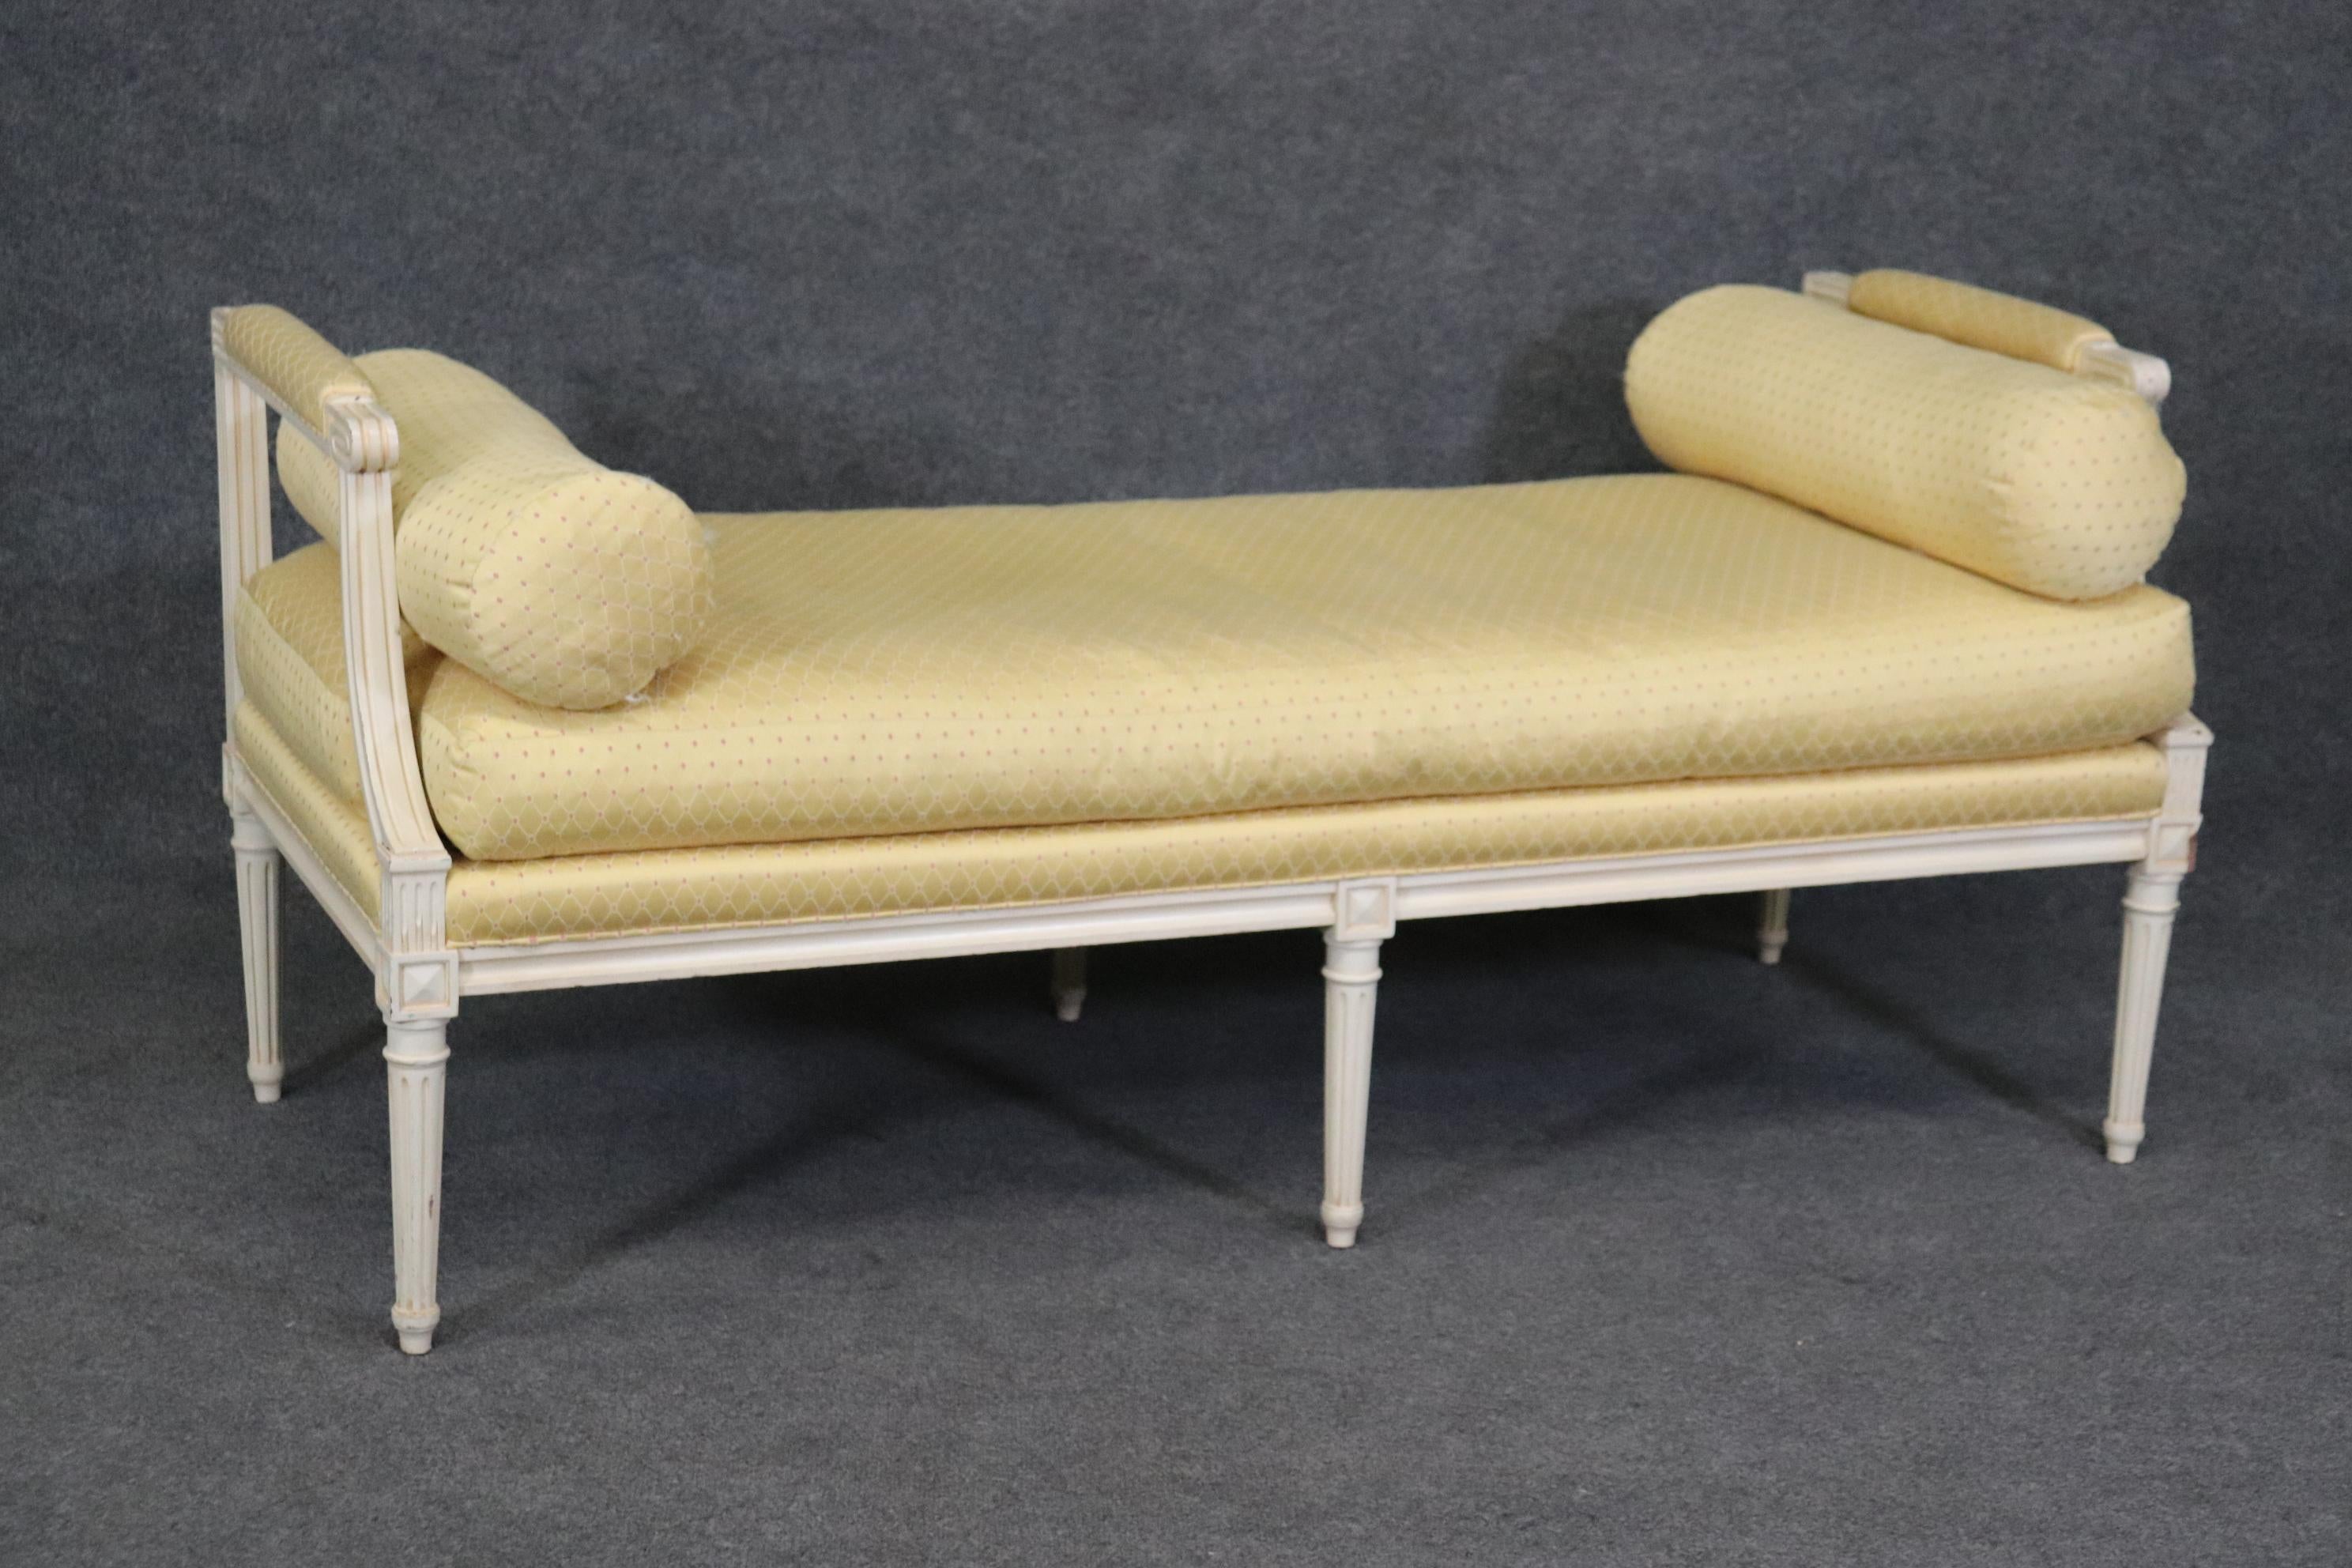 This is a fantastic, super clean bright yellow and bright white French louis XVI style window bench with clean lines and simple beautiful yellow upholstery. The piece has minimal signs of wear and use and dates to the 1950s. Measures 28.75 tall x